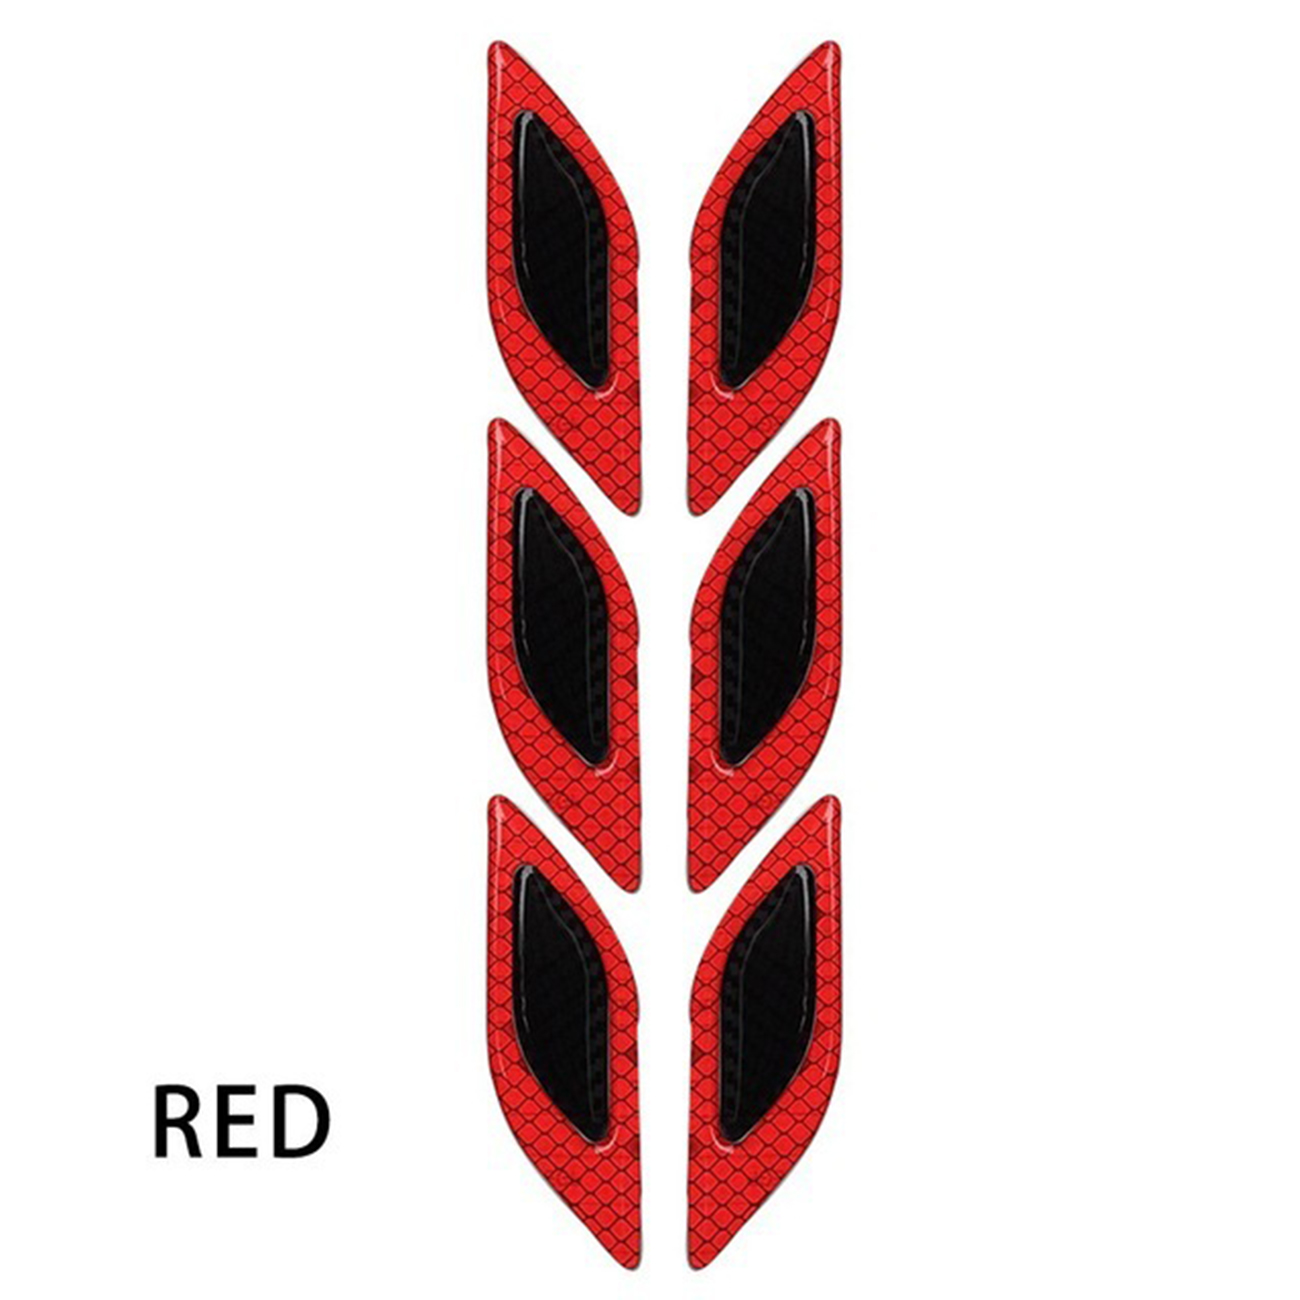 6Pcs Set Safety Reflective Tape Leaf Warning Mark Car Bumper Sticker Accessories Car Exterior Stickers